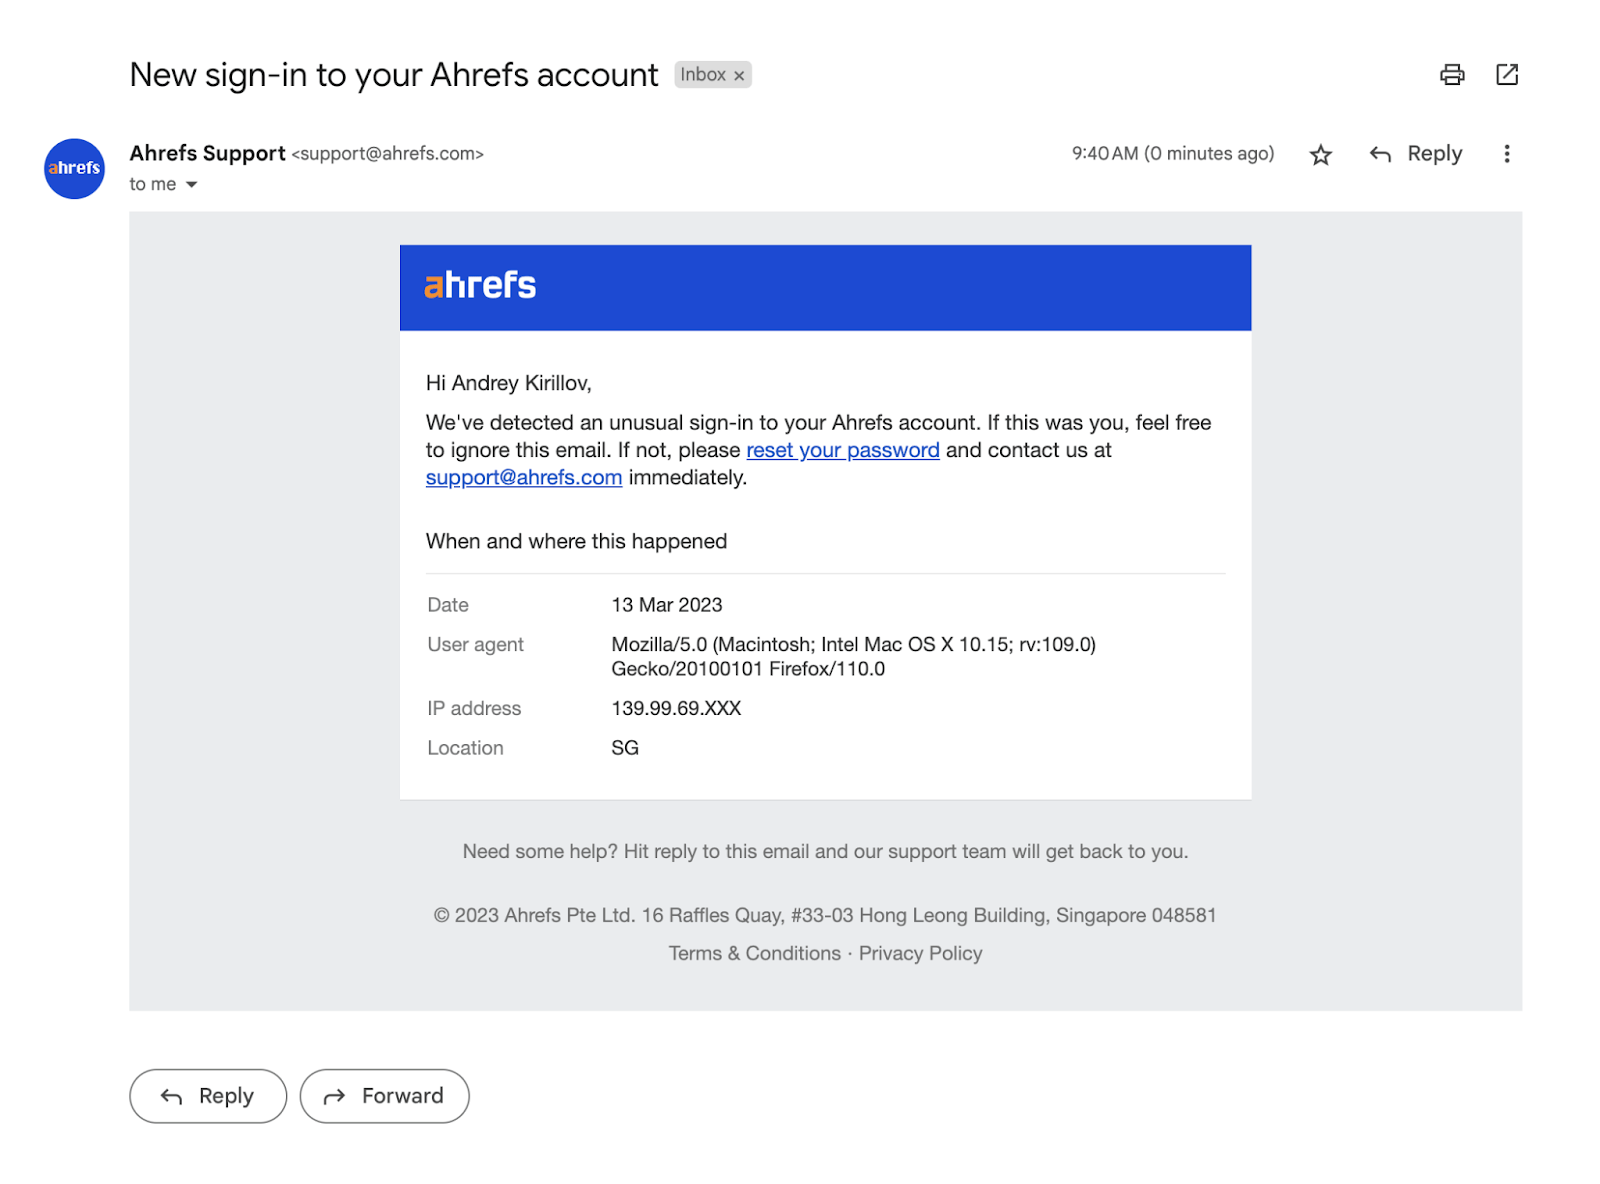 New sign-in email notification